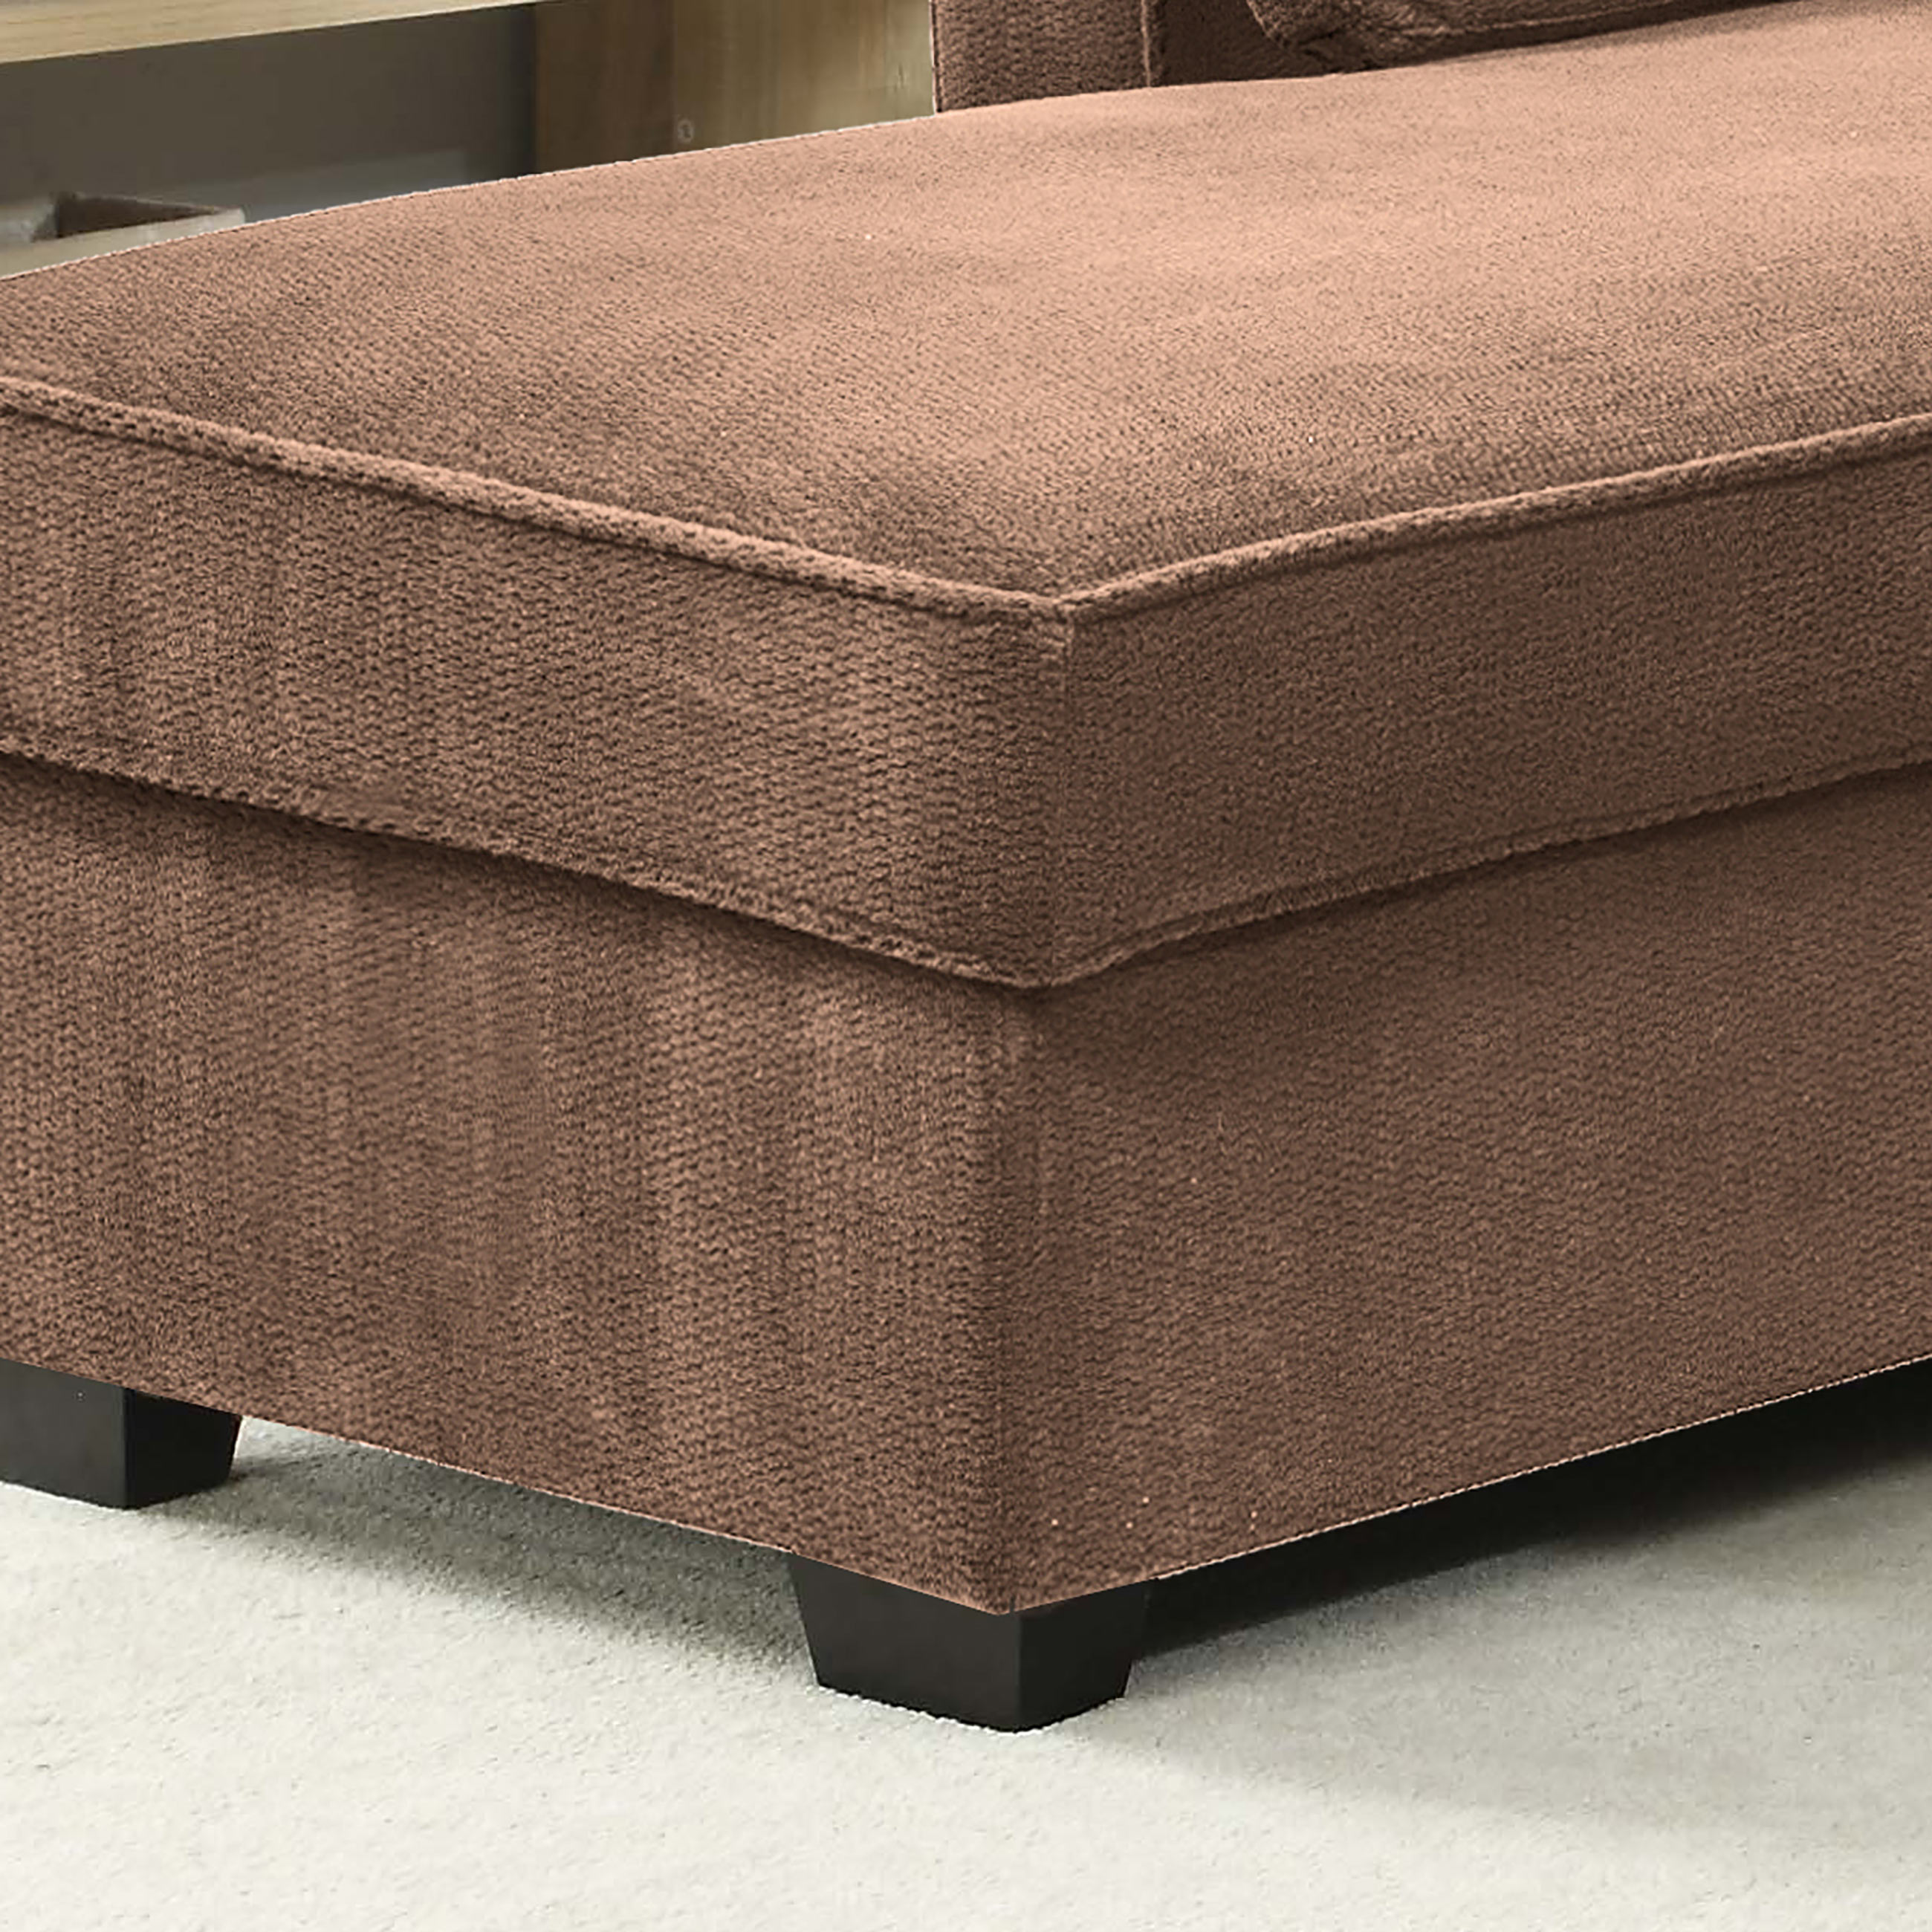 Chaela Sectional Convertible Sofa Light Brown by Serta Lifestyle